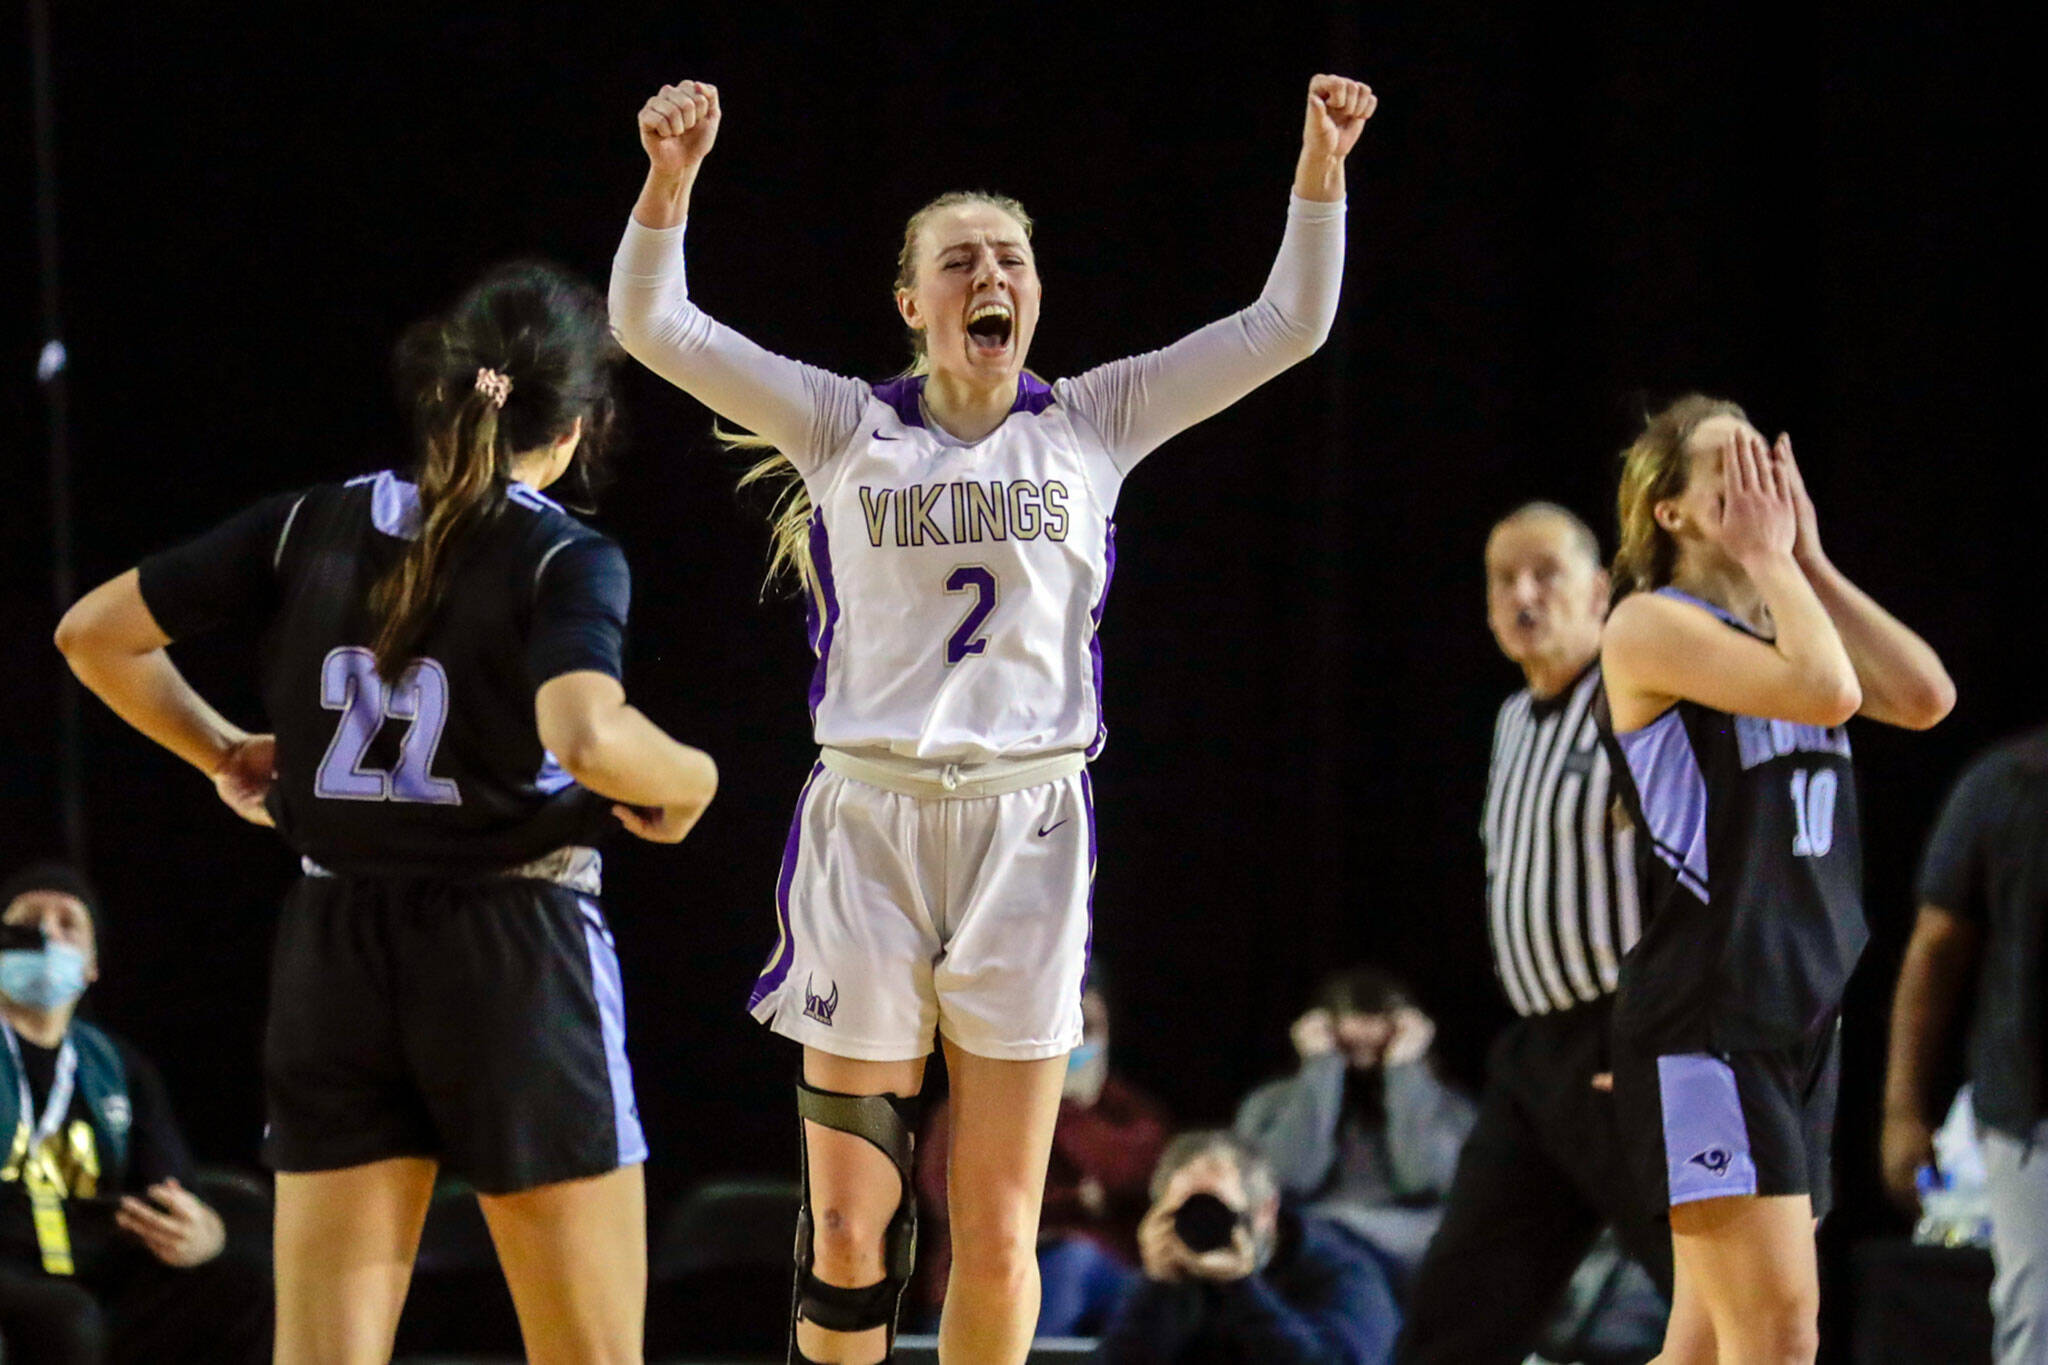 Lake Stevens’ Chloe Pattison celebrates her team’s victory over Rogers on Wednesday afternoon in Tacoma. The Vikings advance with the 41-37 overtime win over the Rams. (Kevin Clark / The Herald)